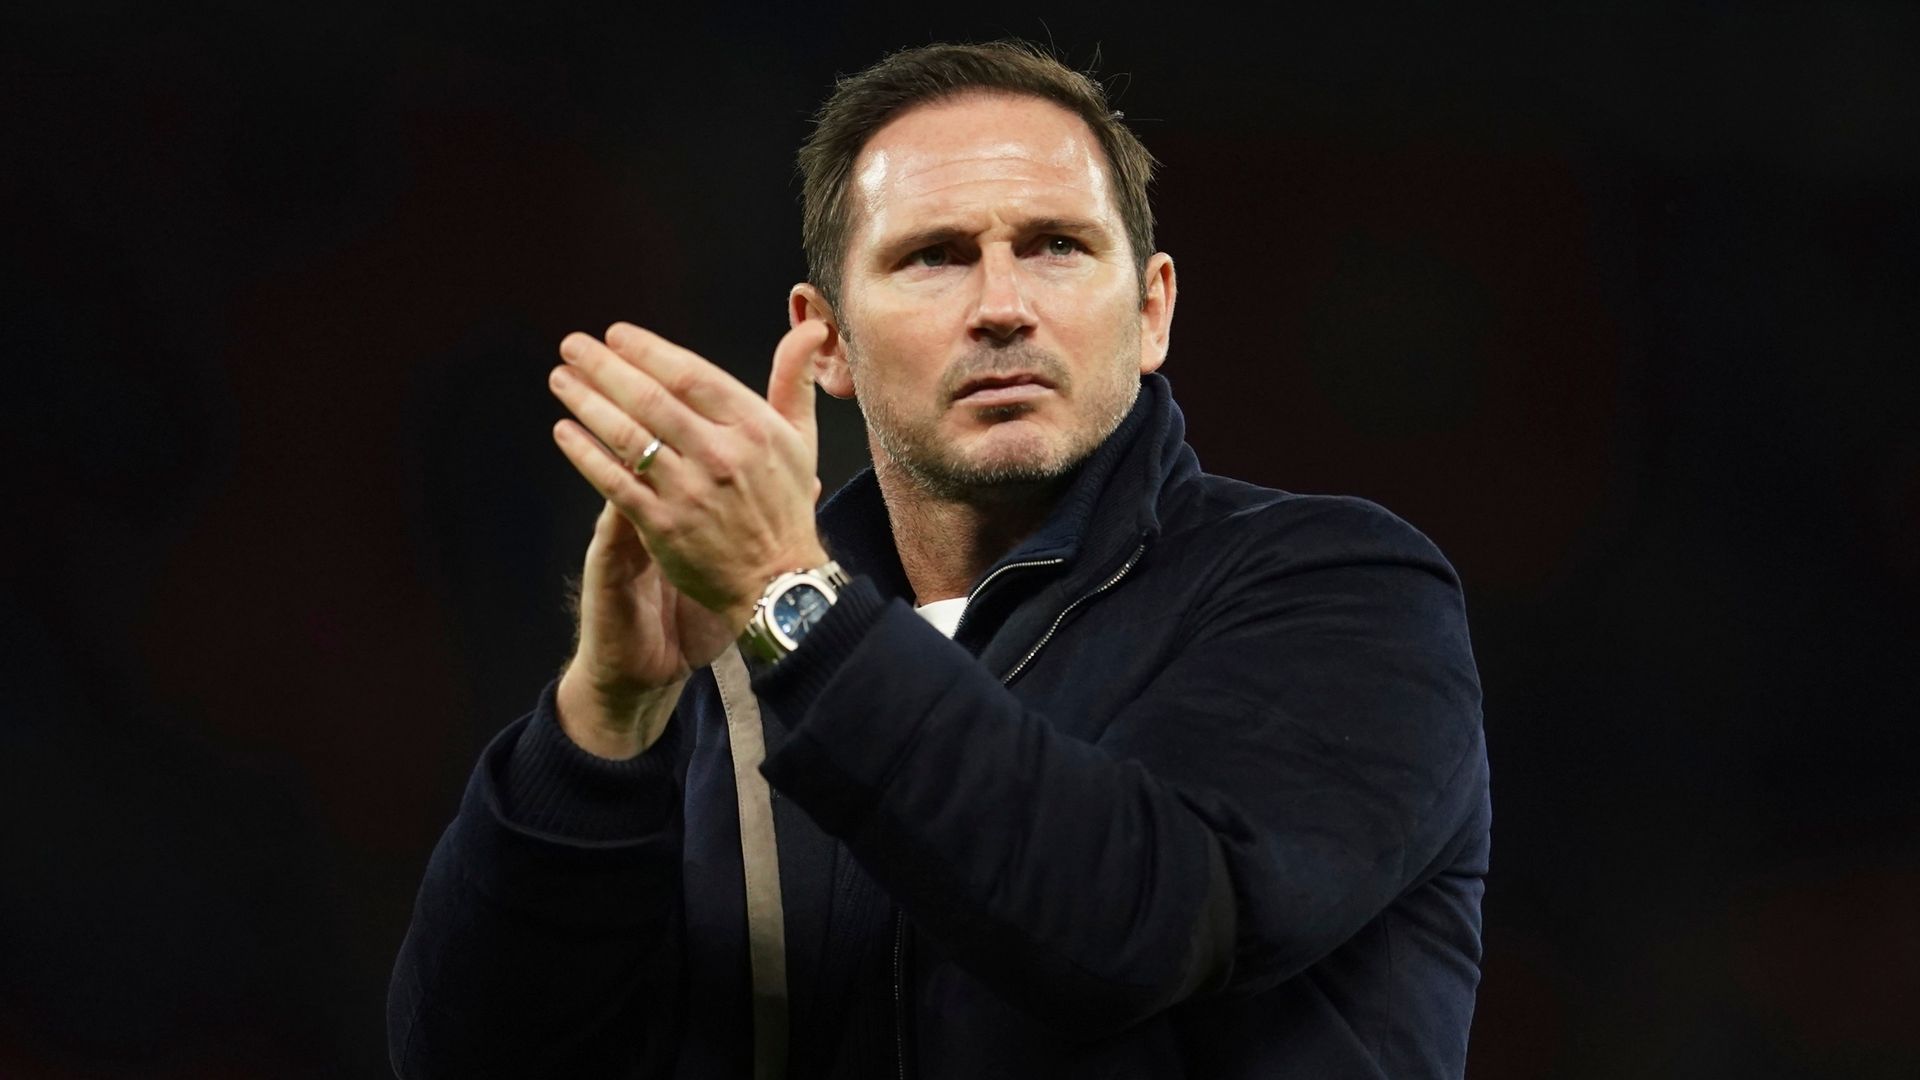 Everton owner Moshiri backs Lampard in open letter to fans